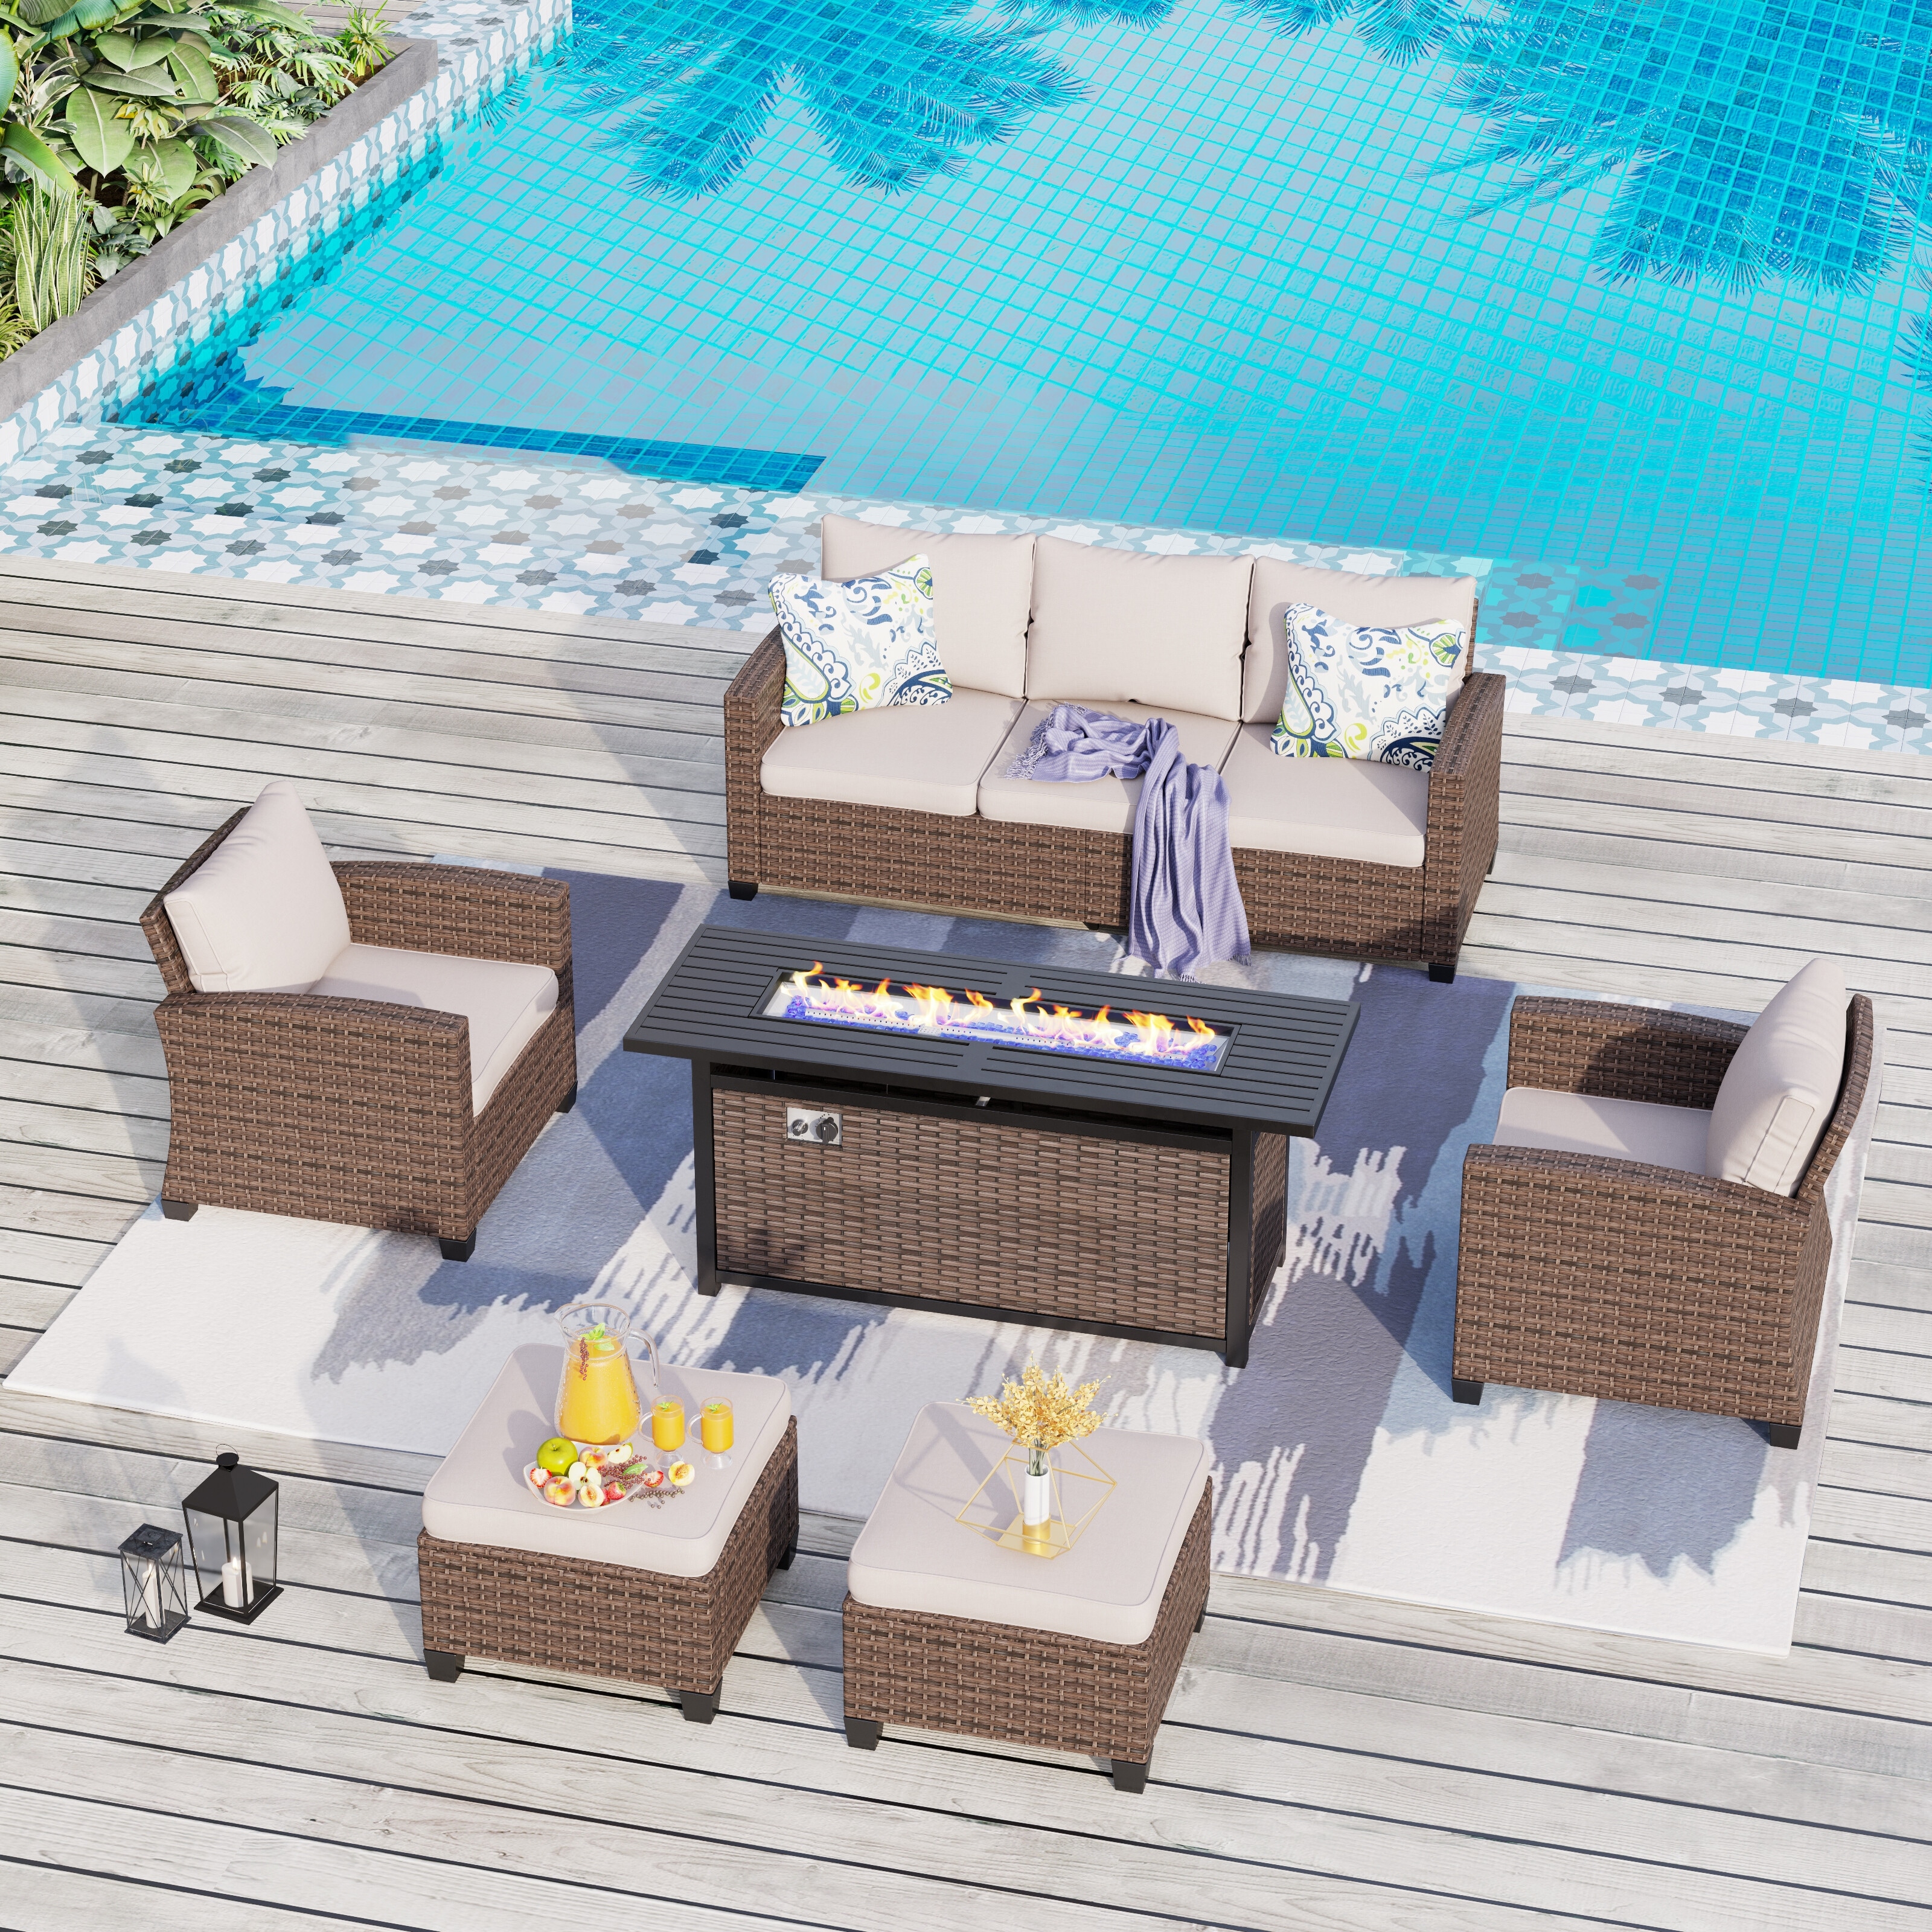 MakeYourDay 7/9-Seat Patio Furniture Wicker Rattan Outdoor High-back Sectional Sofa Conversation Set with Firepit Table